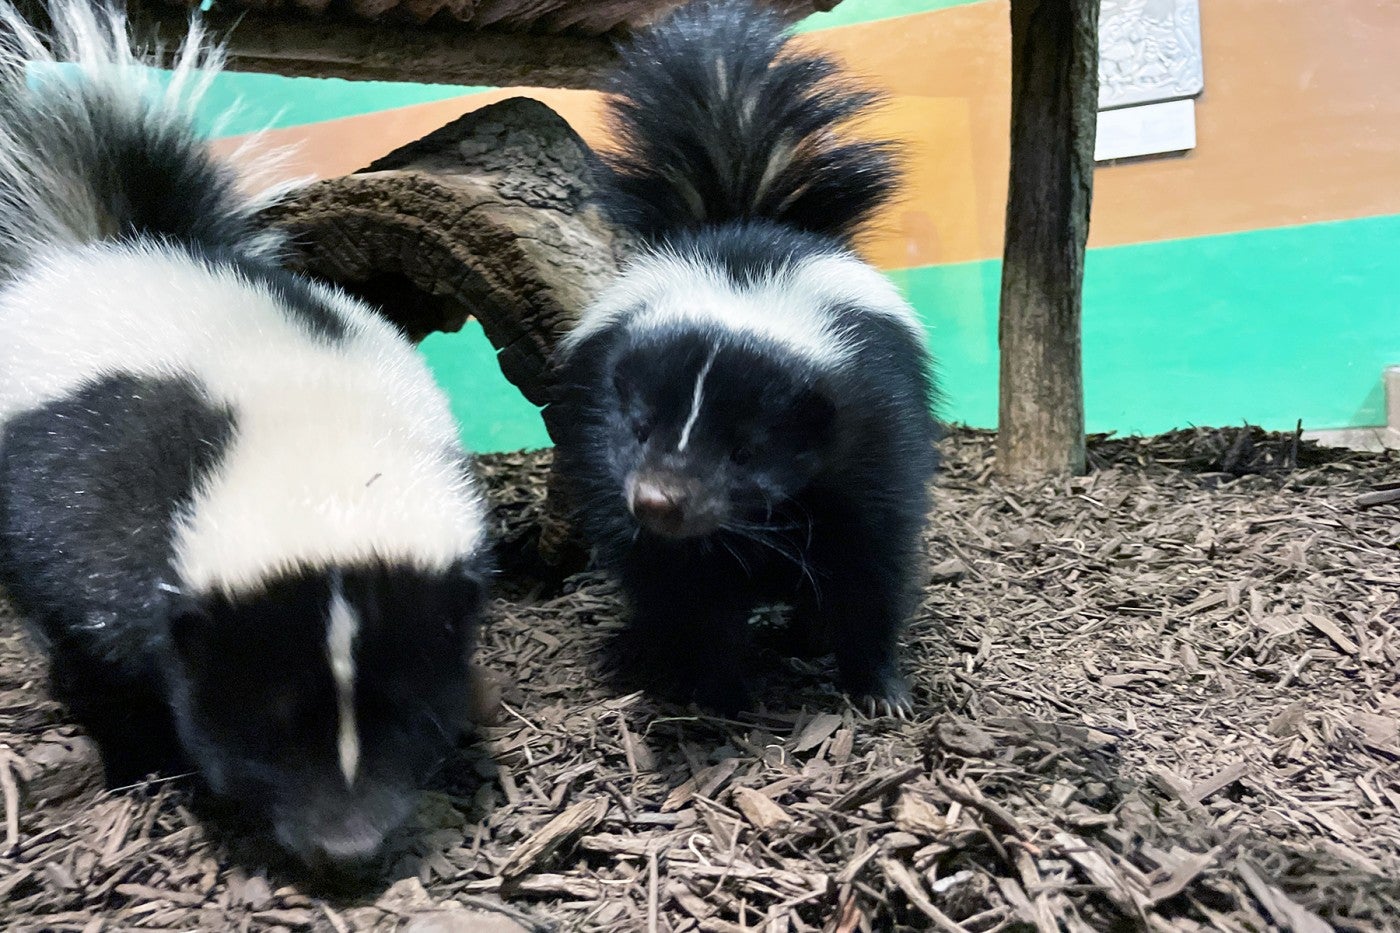 Skunk brothers Sauerkraut and Pigpen forage for food in their habitat at the Small Mammal House. 